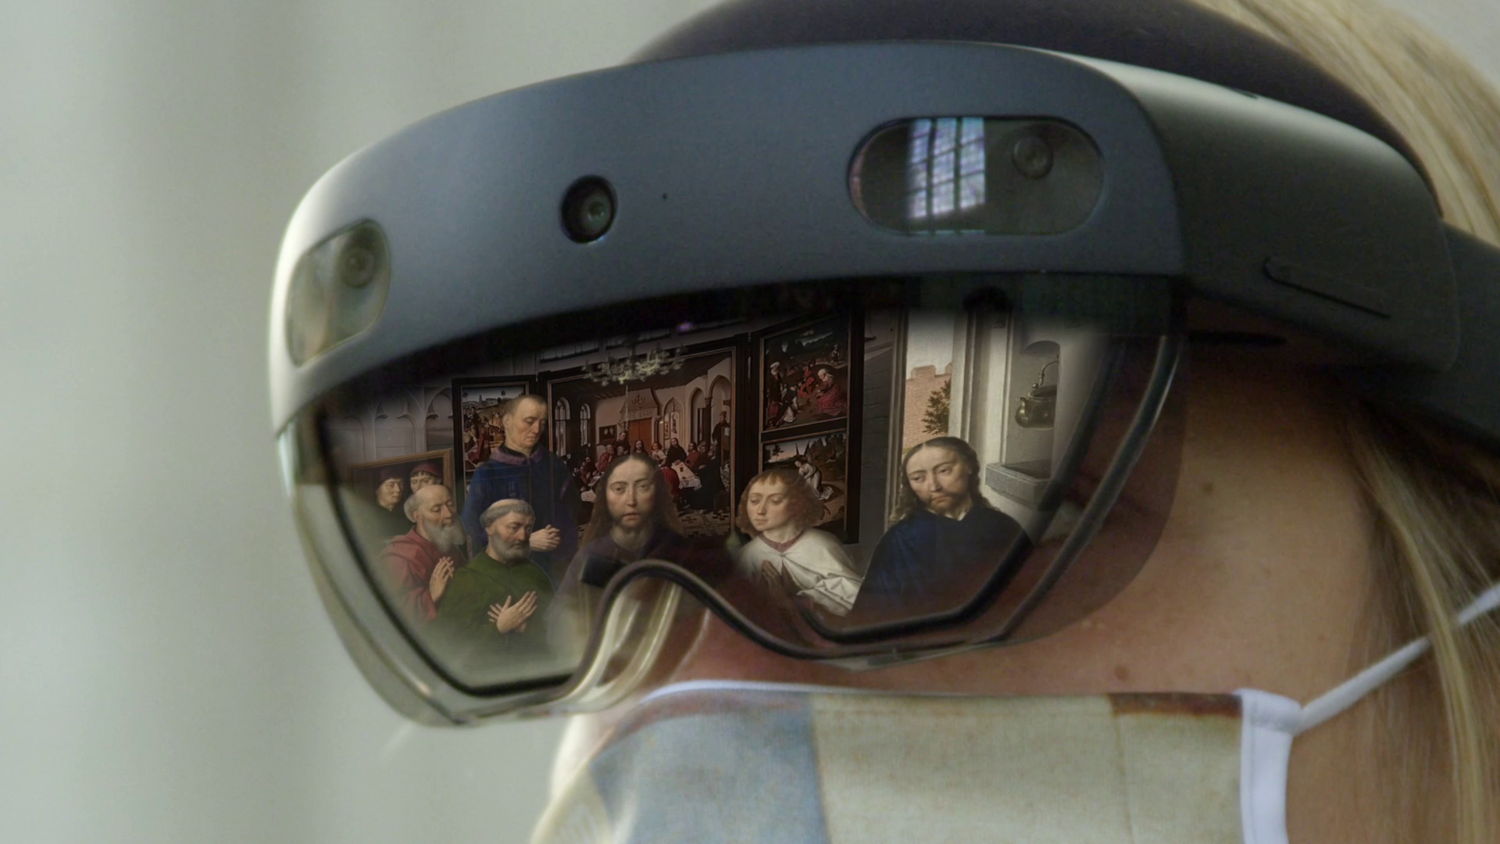 Visitors discover the artworks of the St Peter’s Church in Leuven using the HoloLens 2. Image: Tom Van Dongen